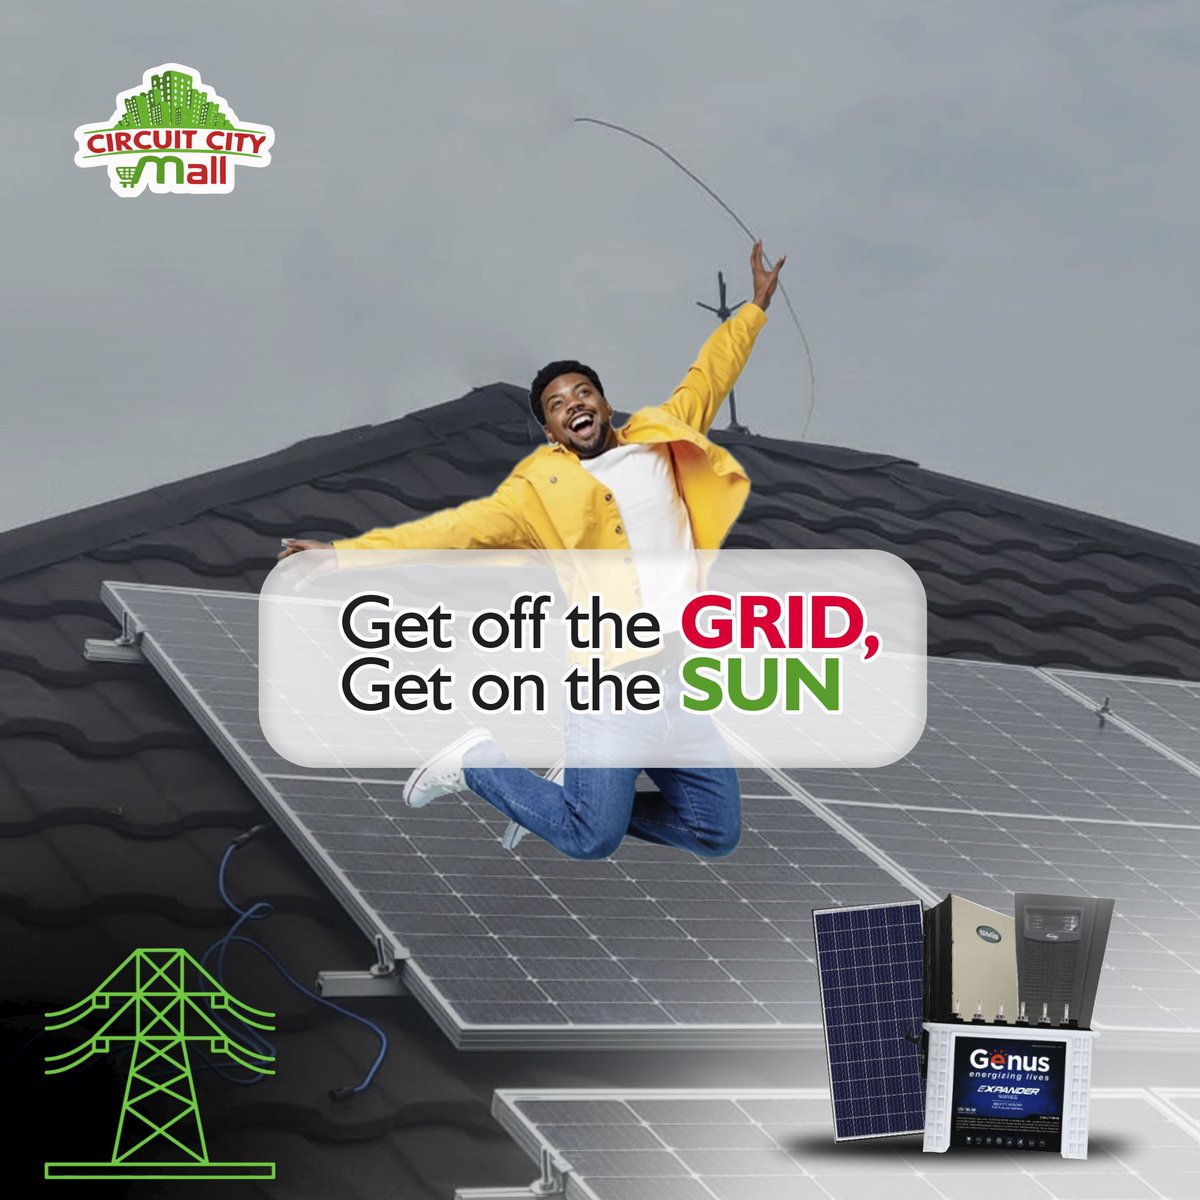 Unplug & Power Up: Go Off the Grid with Solar Energy! ☀️💡 

Let Circuitcity mall  help you discover the sustainable, reliable solution for your home or business. 
Say goodbye to grid dependence and hello to a brighter, eco-friendly future! 

#SolarRevolution #OffTheGrid